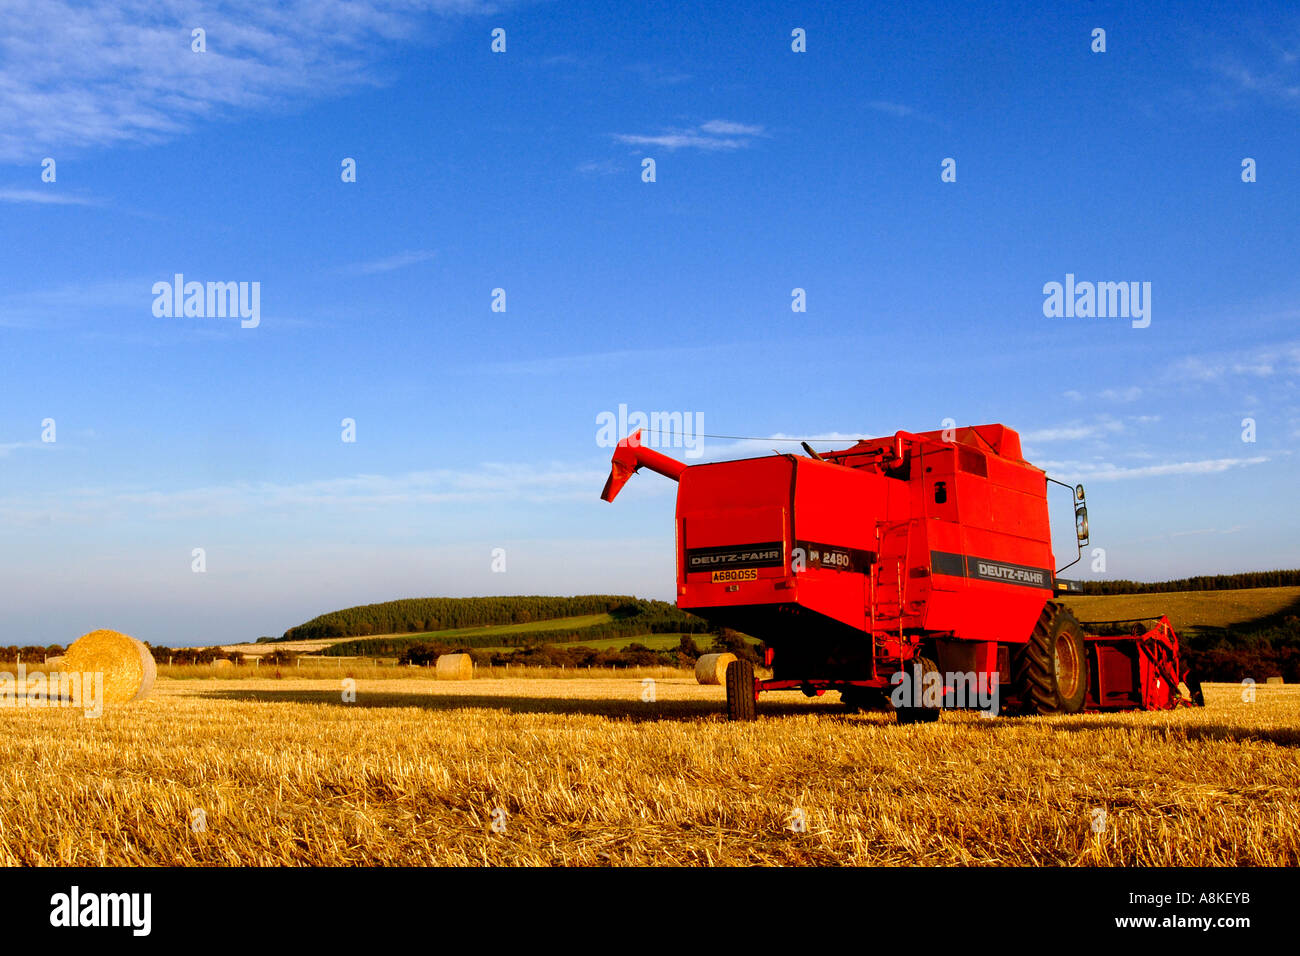 Bright red combine harvester in a harvested field scattered with hay bales under a blue sky Stock Photo